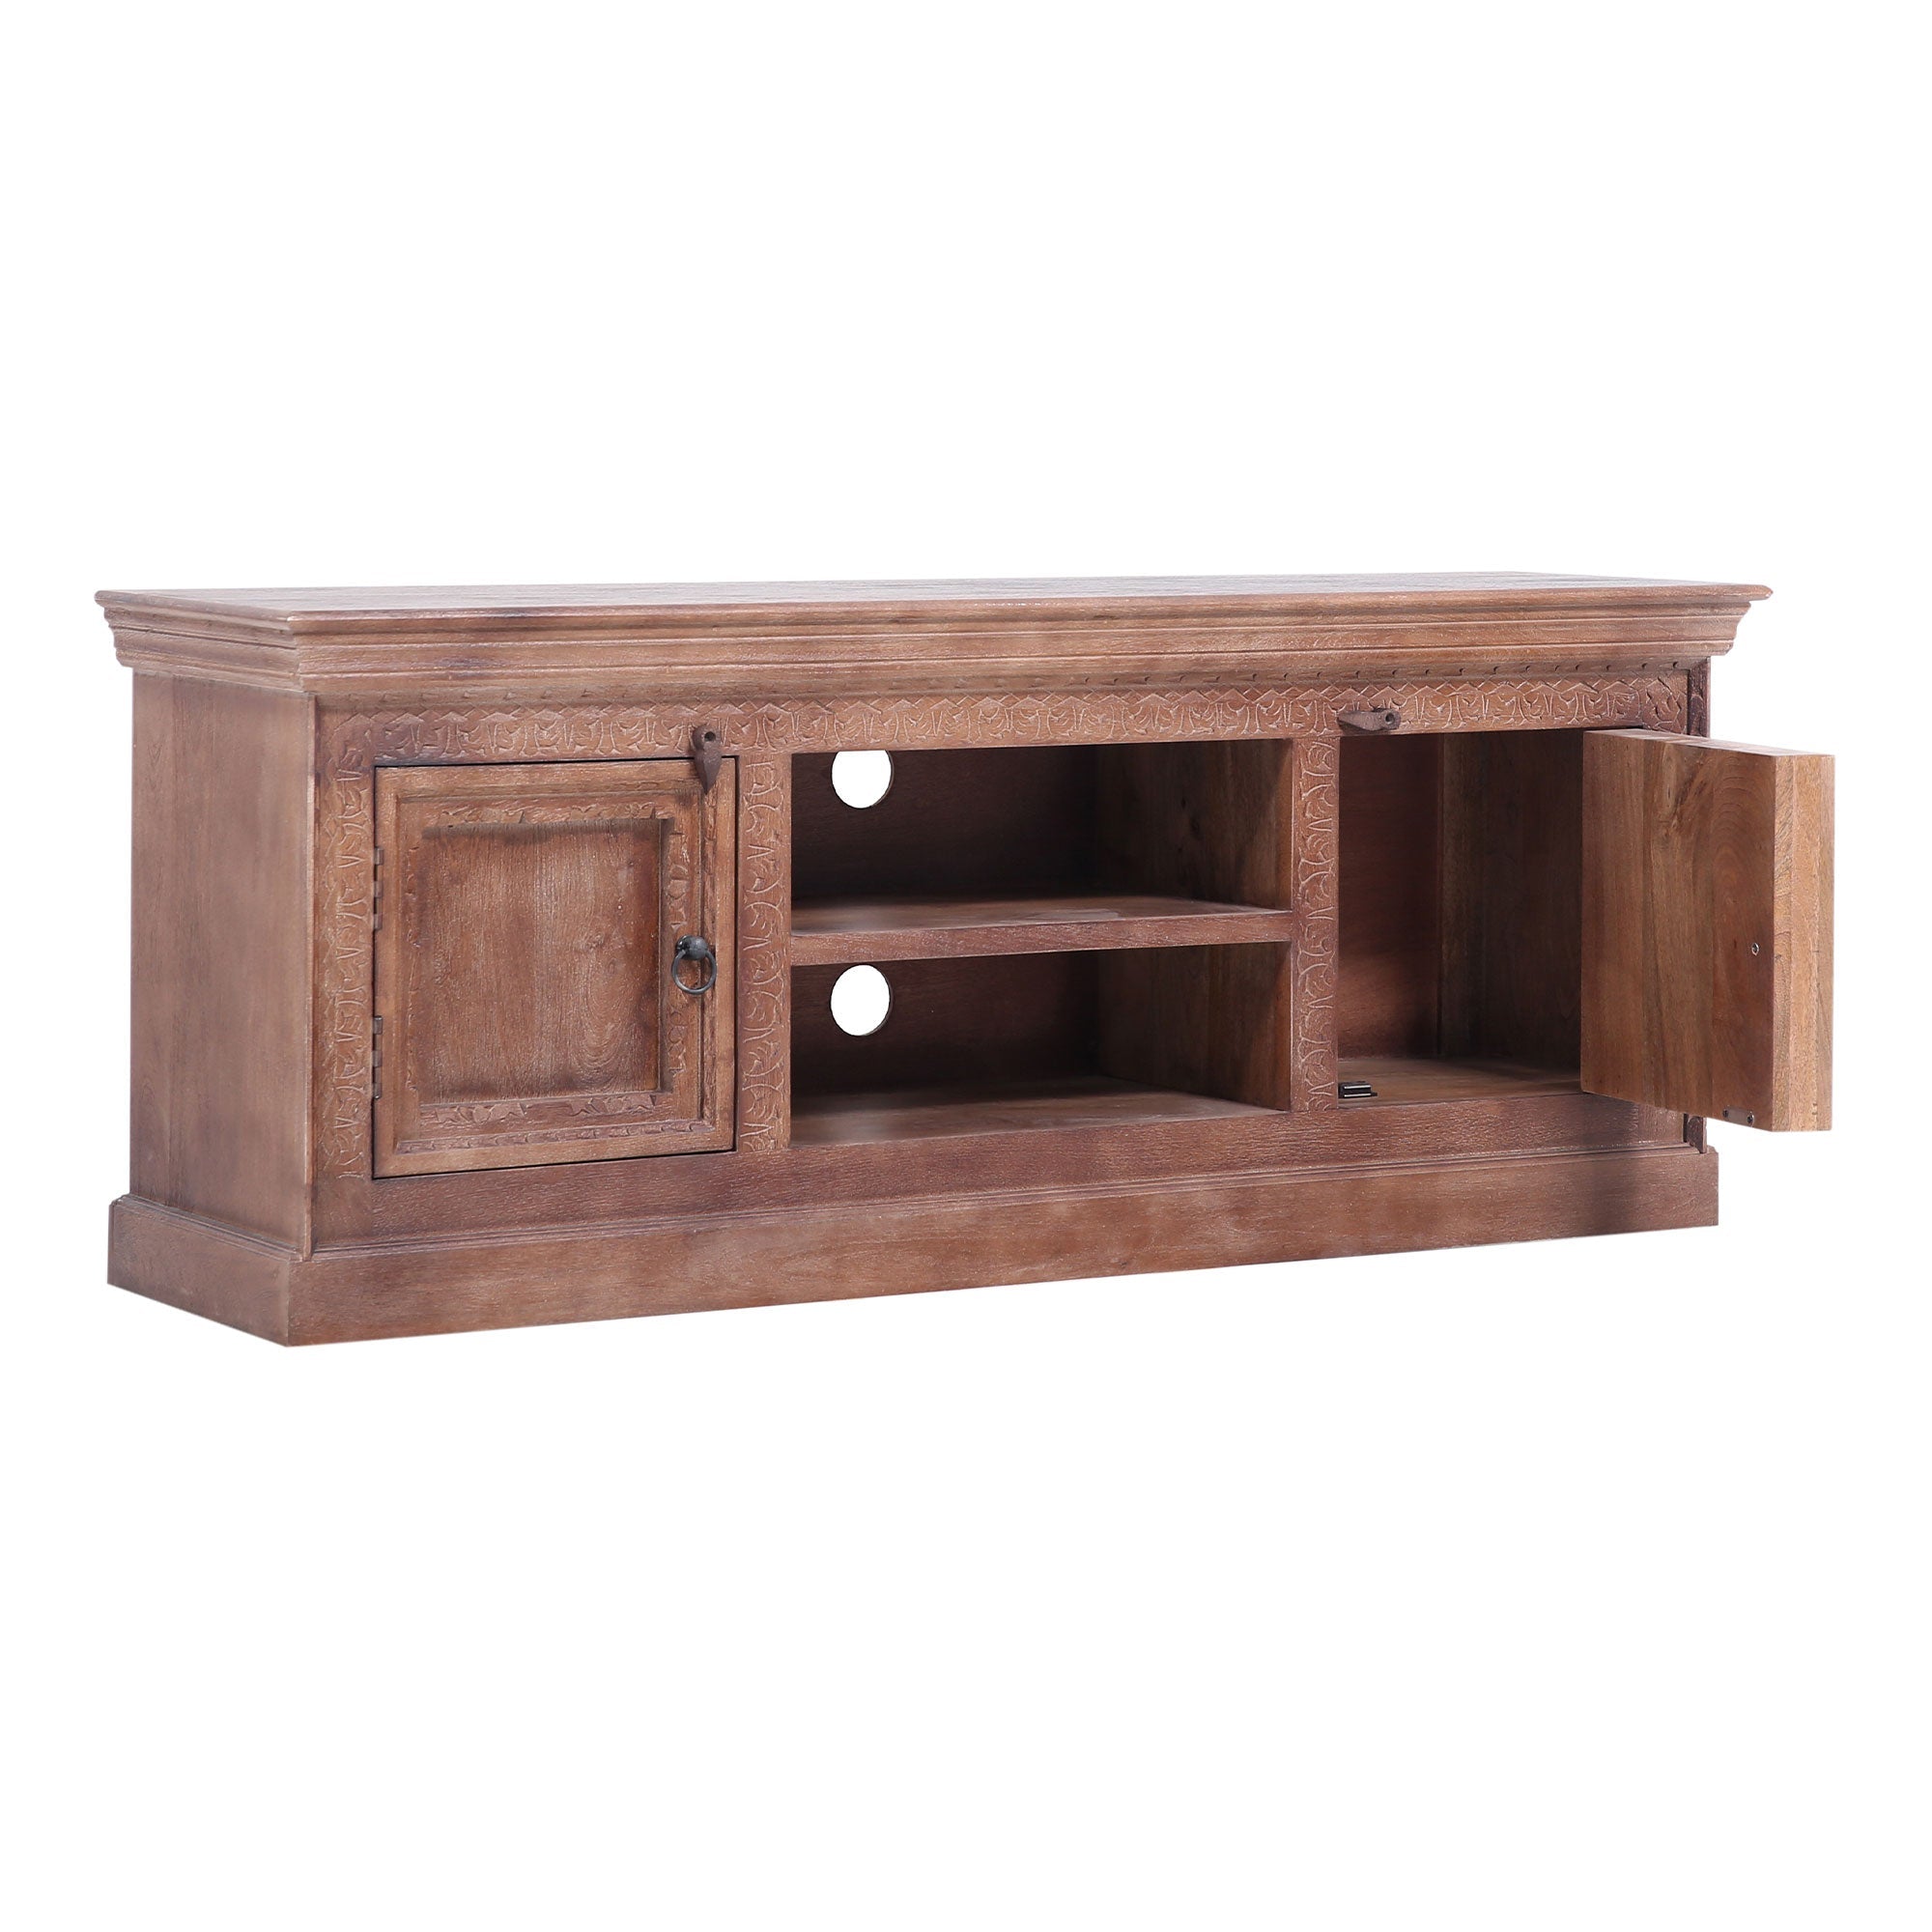 Mahala Nomad Wooden Media Unit in Distressed Brown Finish in Media Units by VMInnovations